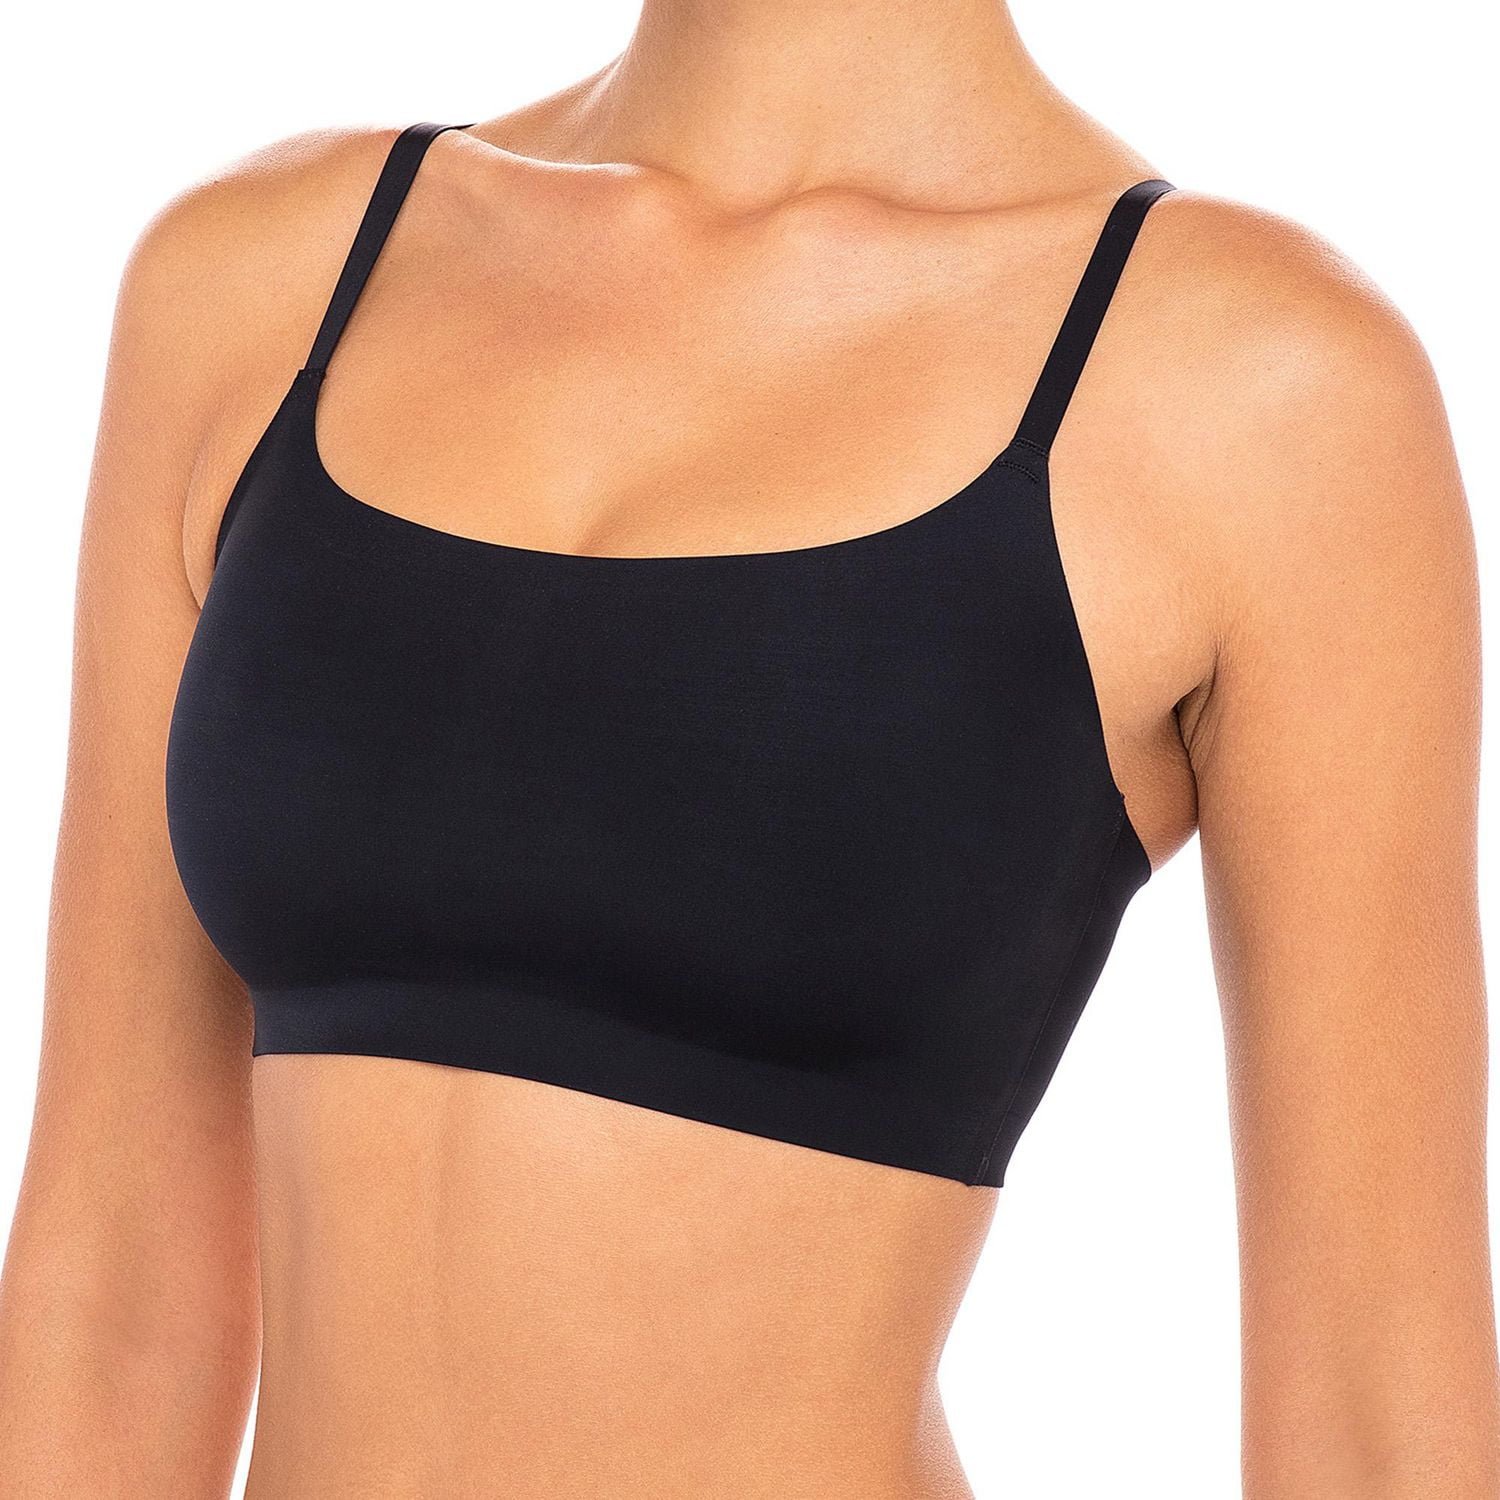 Women's Everyday Double Scoop Longline Bra made with Organic Cotton